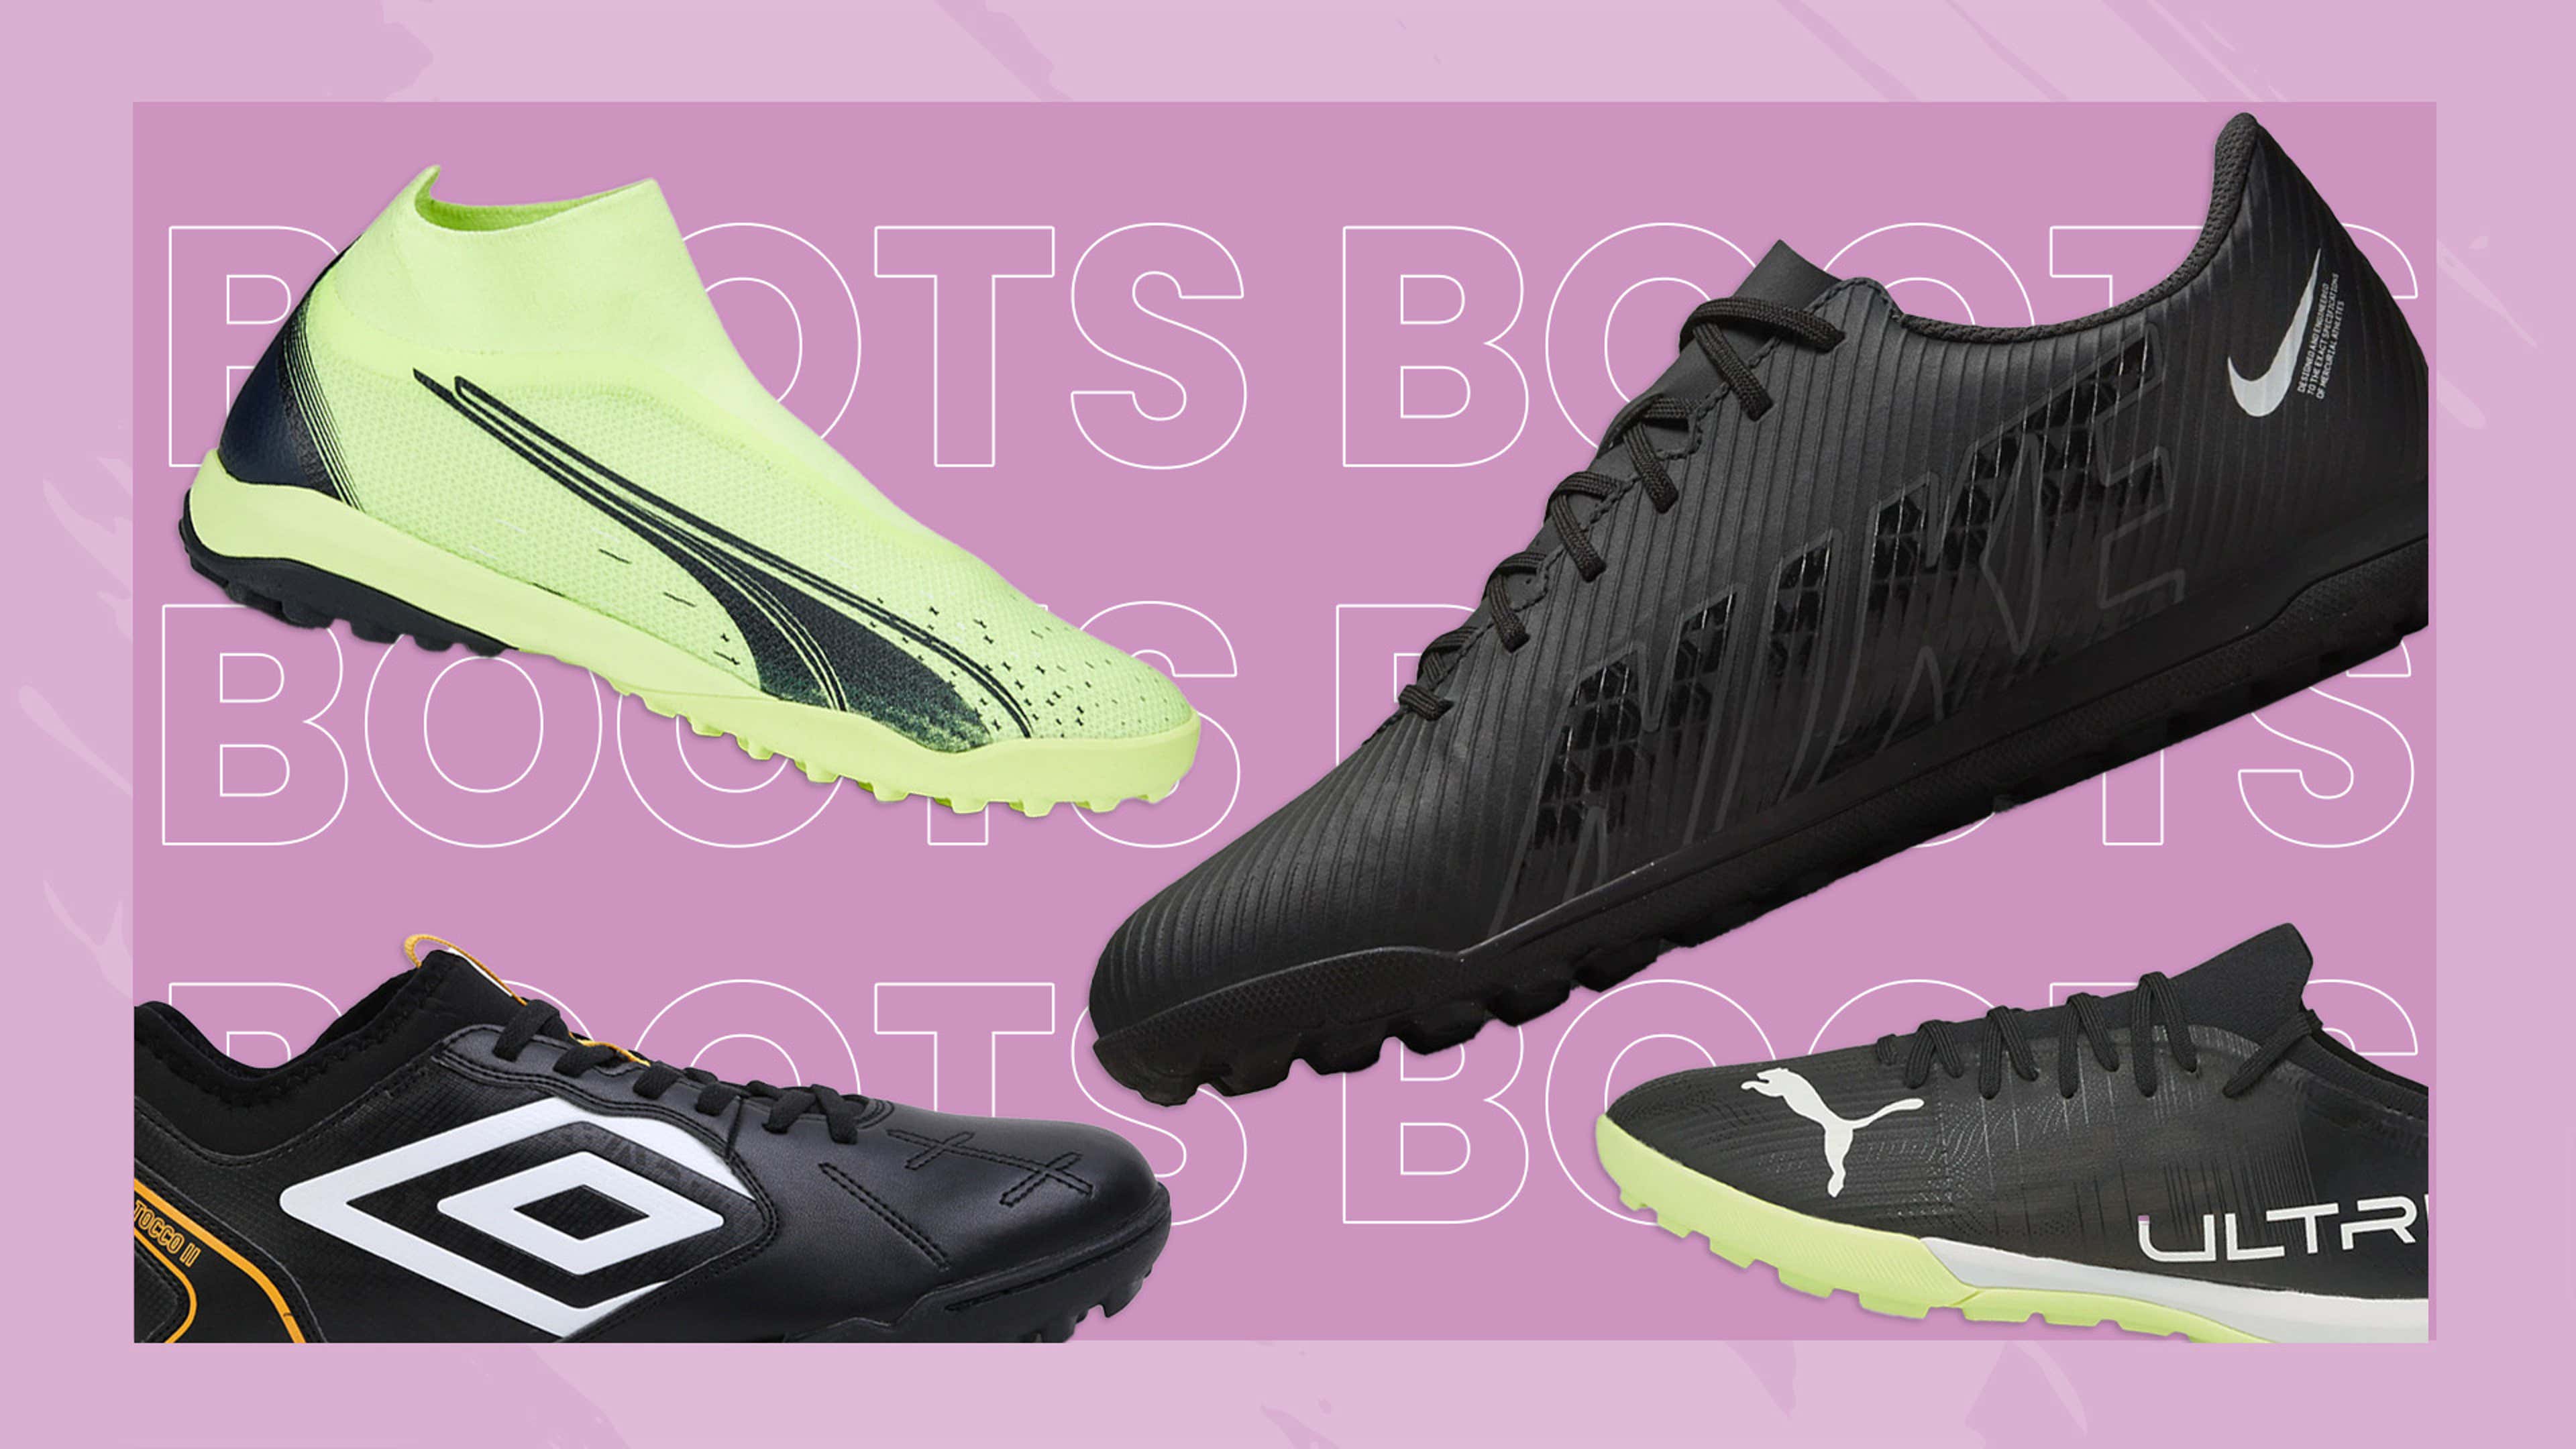 The best astro turf football boots you can buy in 2023 | Goal.com UK